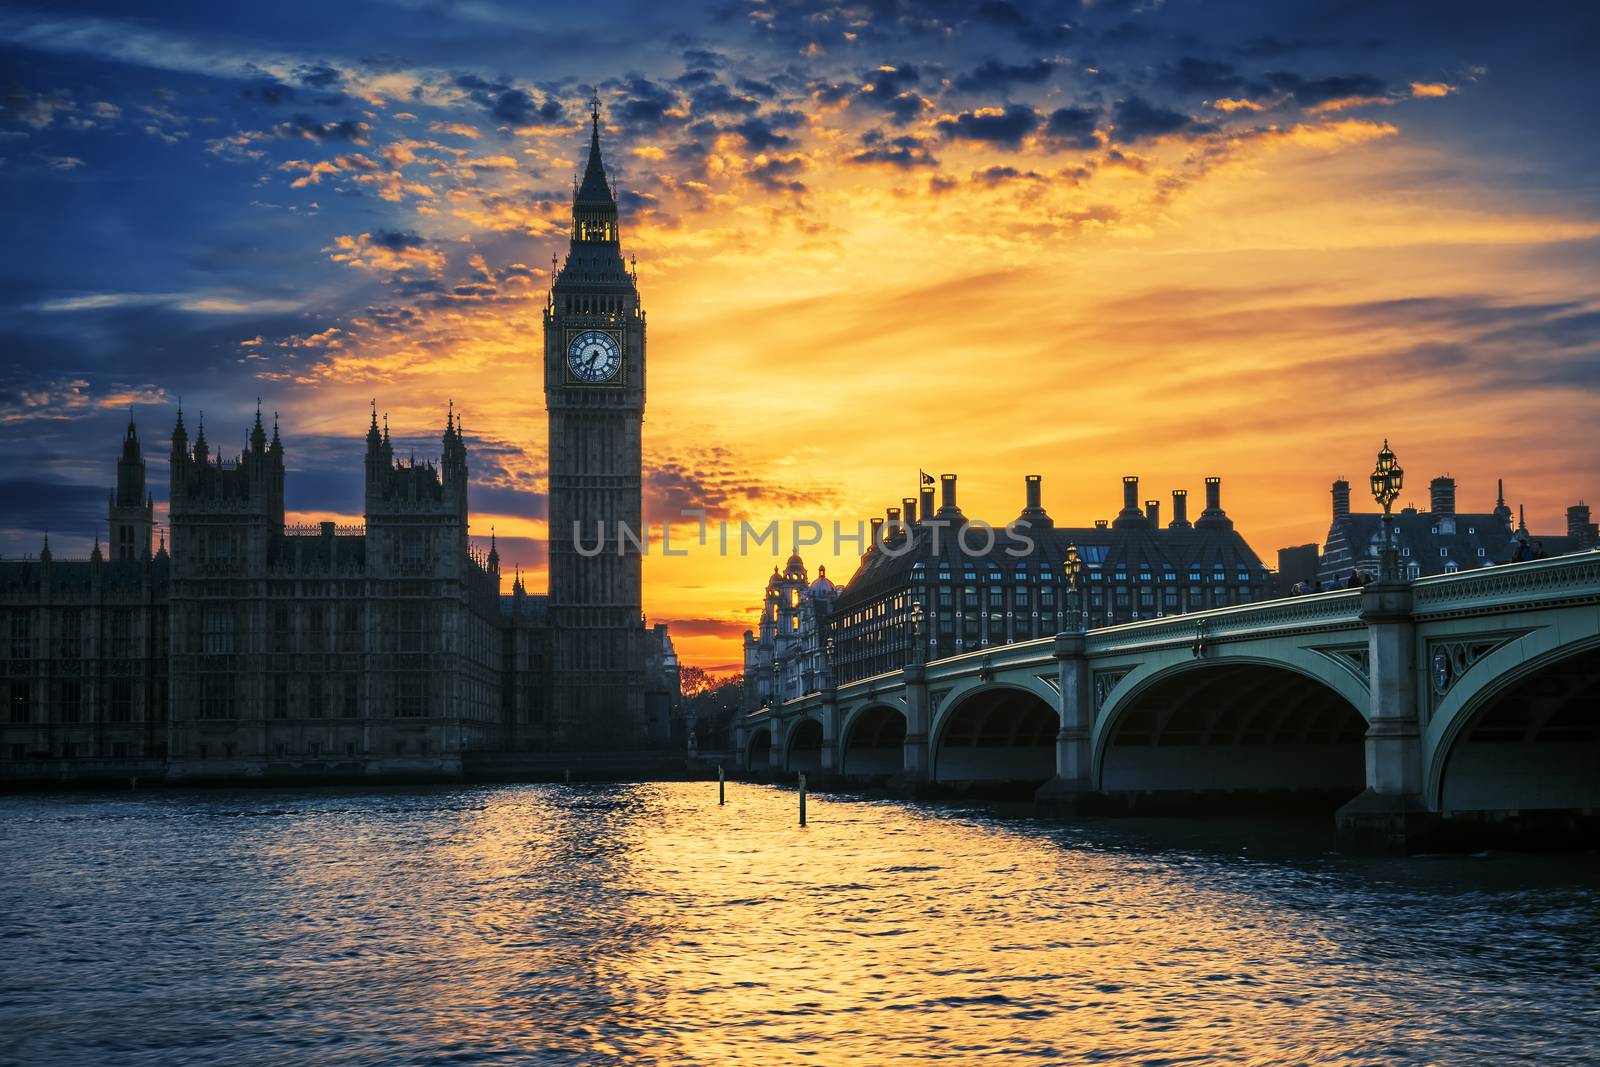 View of Big Ben and Westminster Bridge at sunset by vwalakte